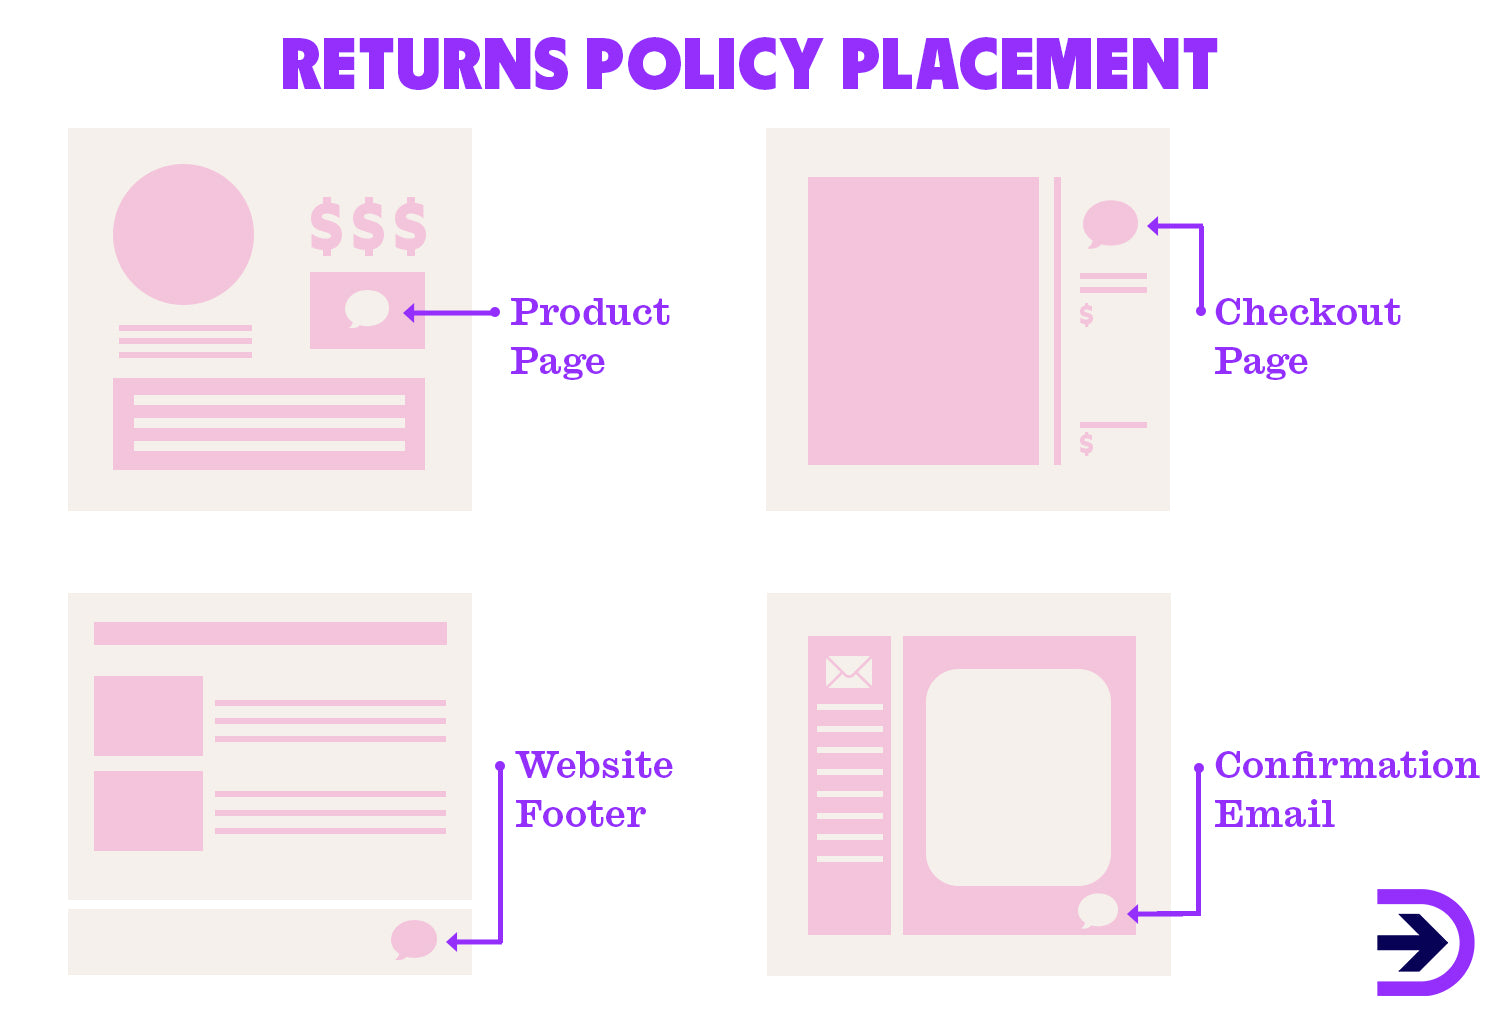 Make your returns policy easy to find. Most retailers include a link in their website footer, but consider linking it in the checkout or even confirmation emails.